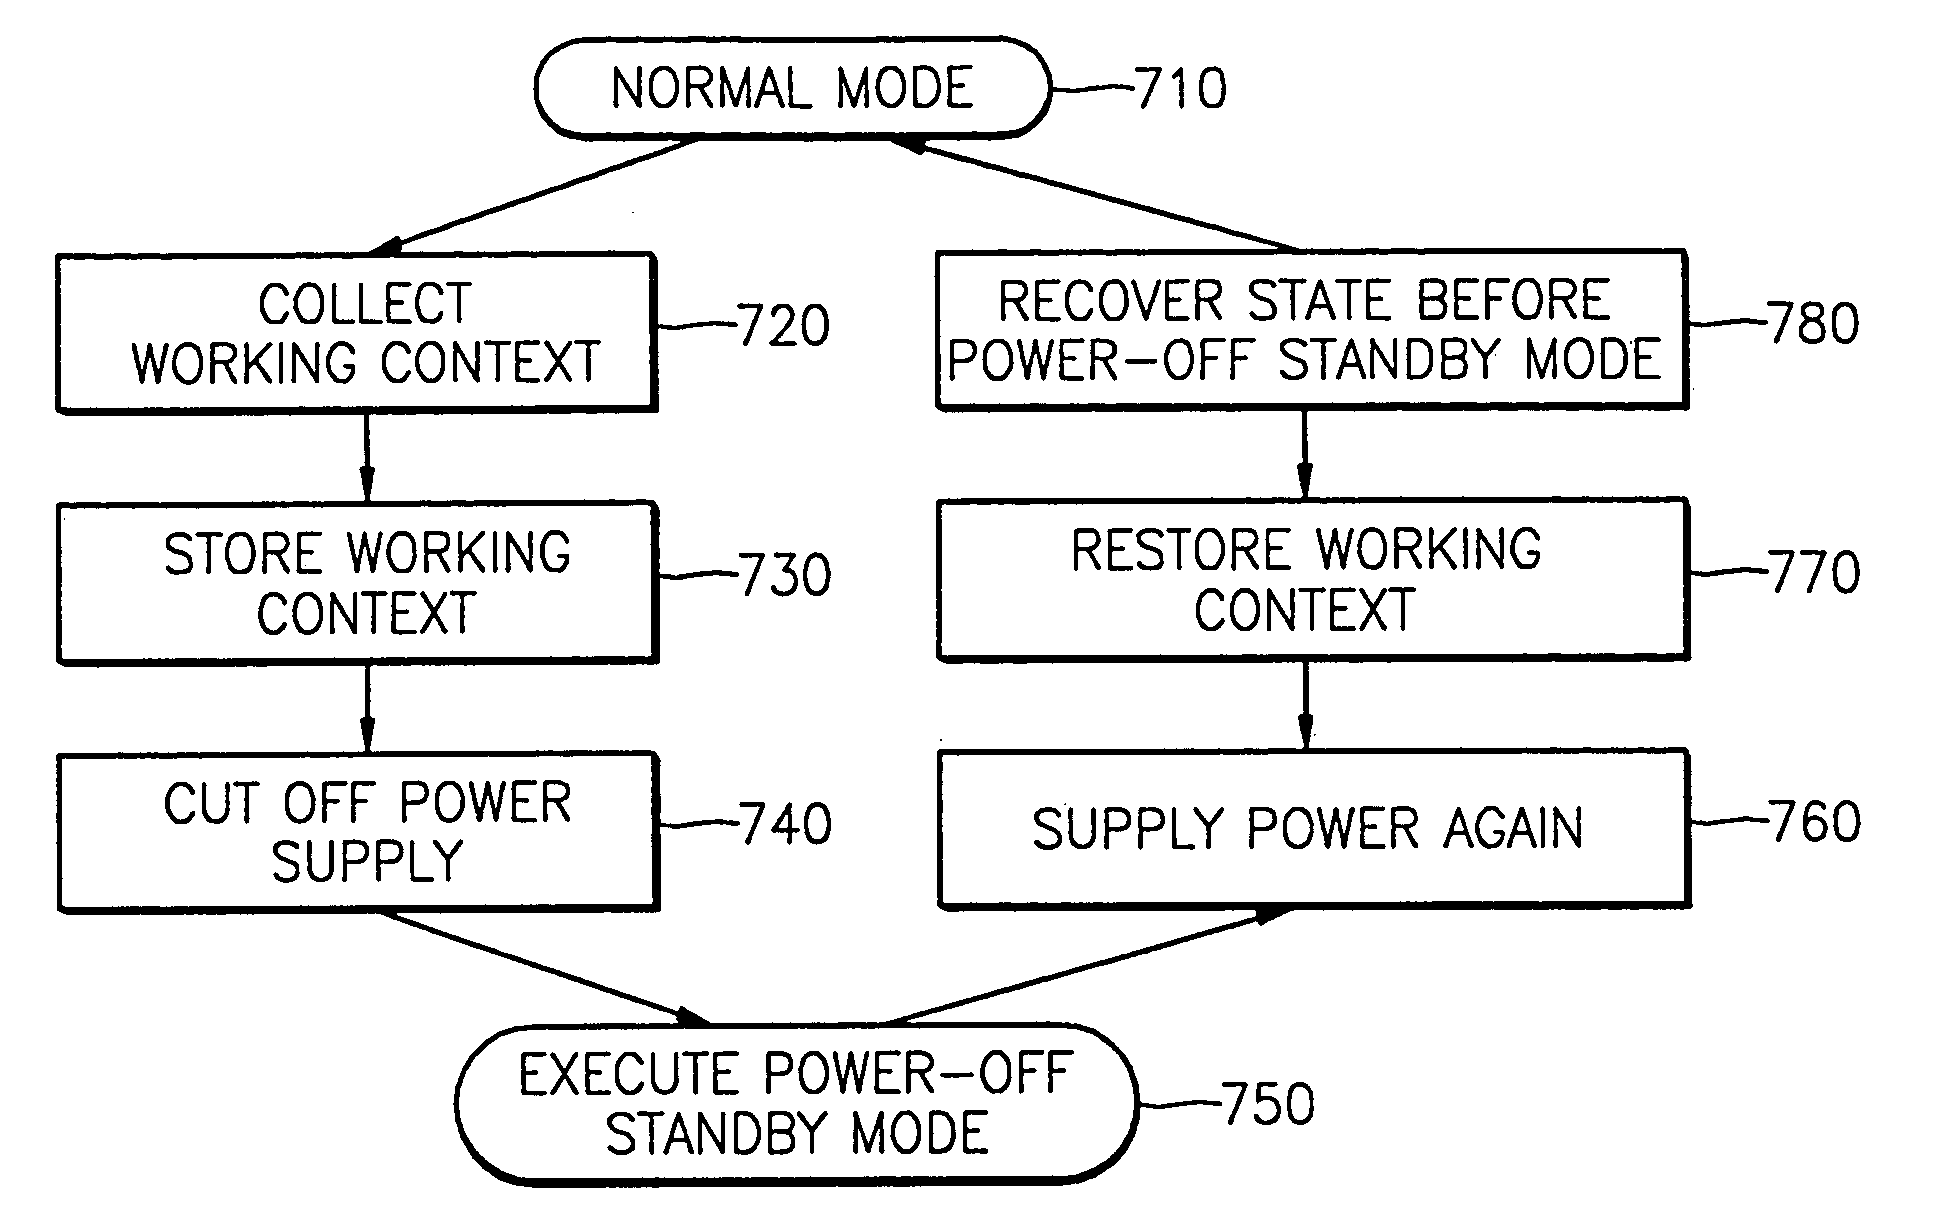 System for storing working context in a non-volatile memory while in a power-off suspend mode and restoring the working context when the power-off suspend mode is released